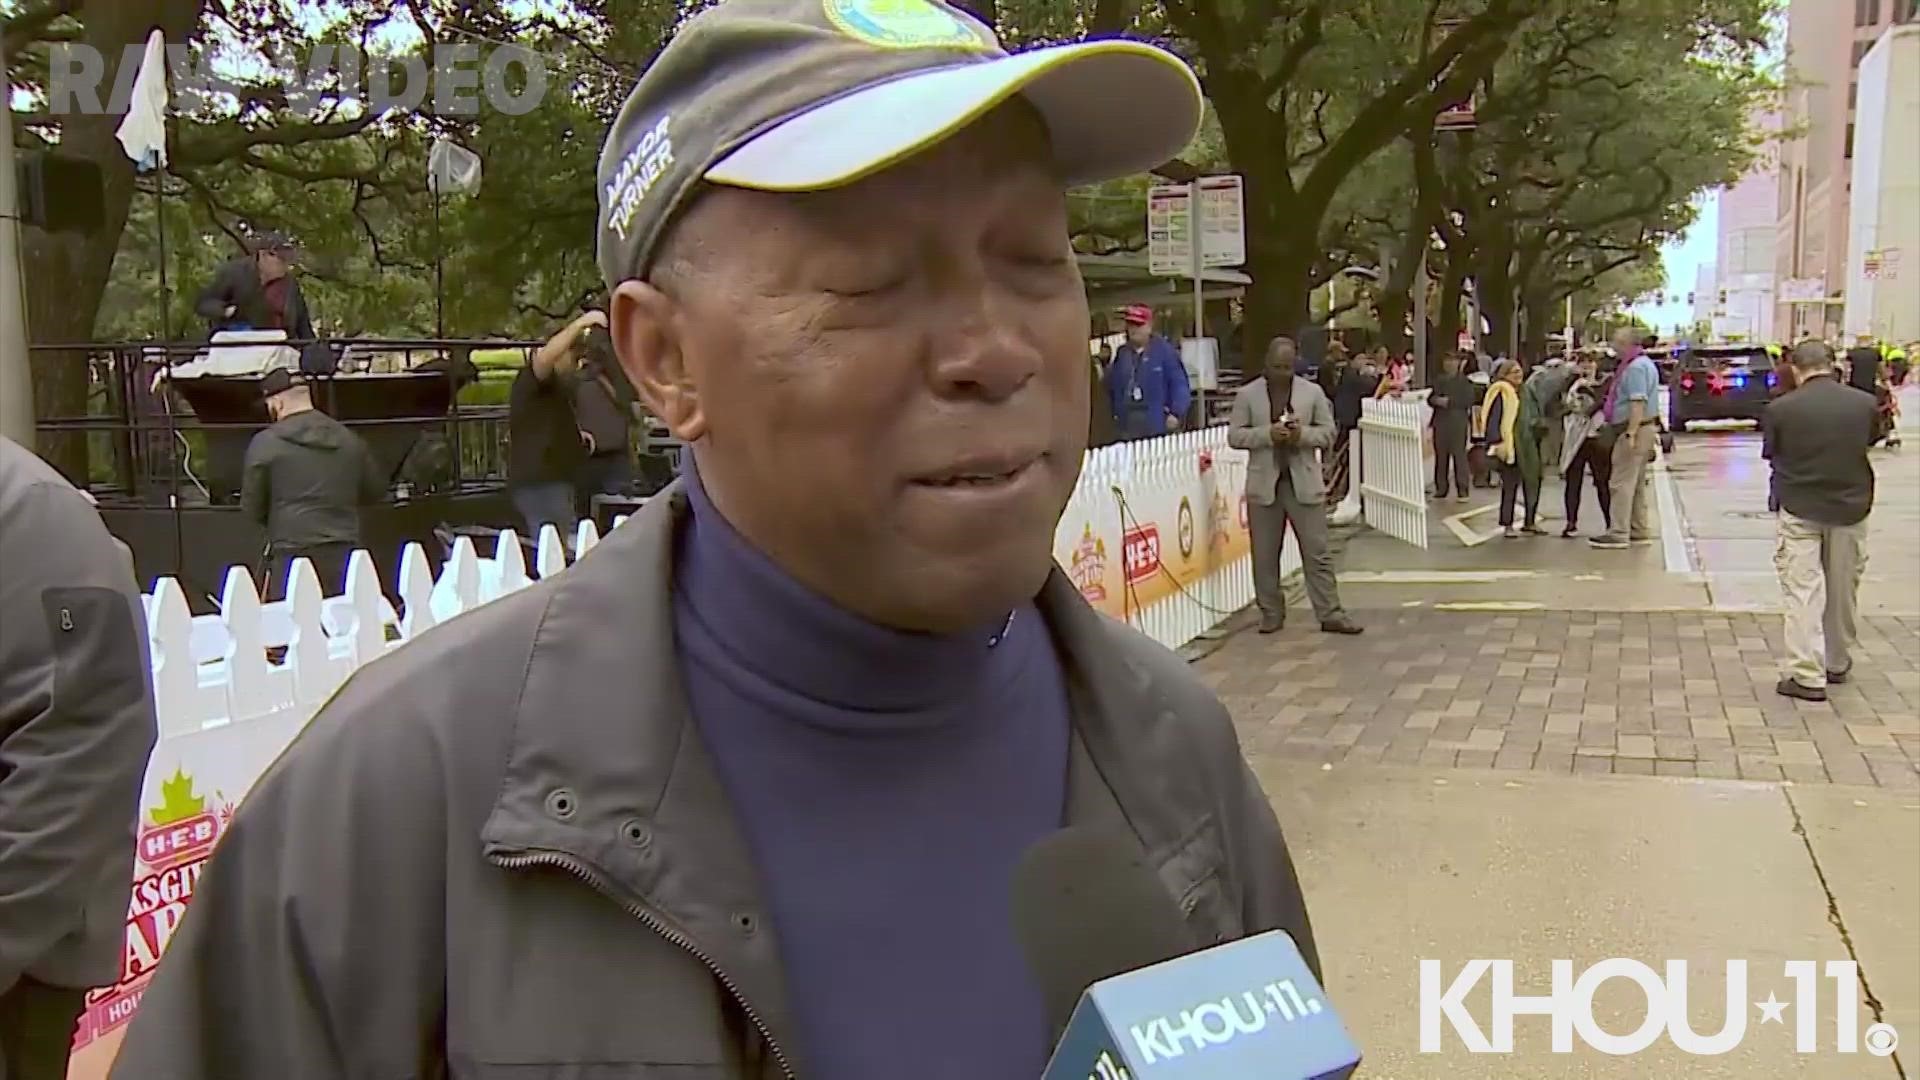 Mayor Sylvester Turner explains why the H-E-B Thanksgiving Day Parade was canceled. "It wasn't the rain that canceled the parade...threat of lightning," he says.